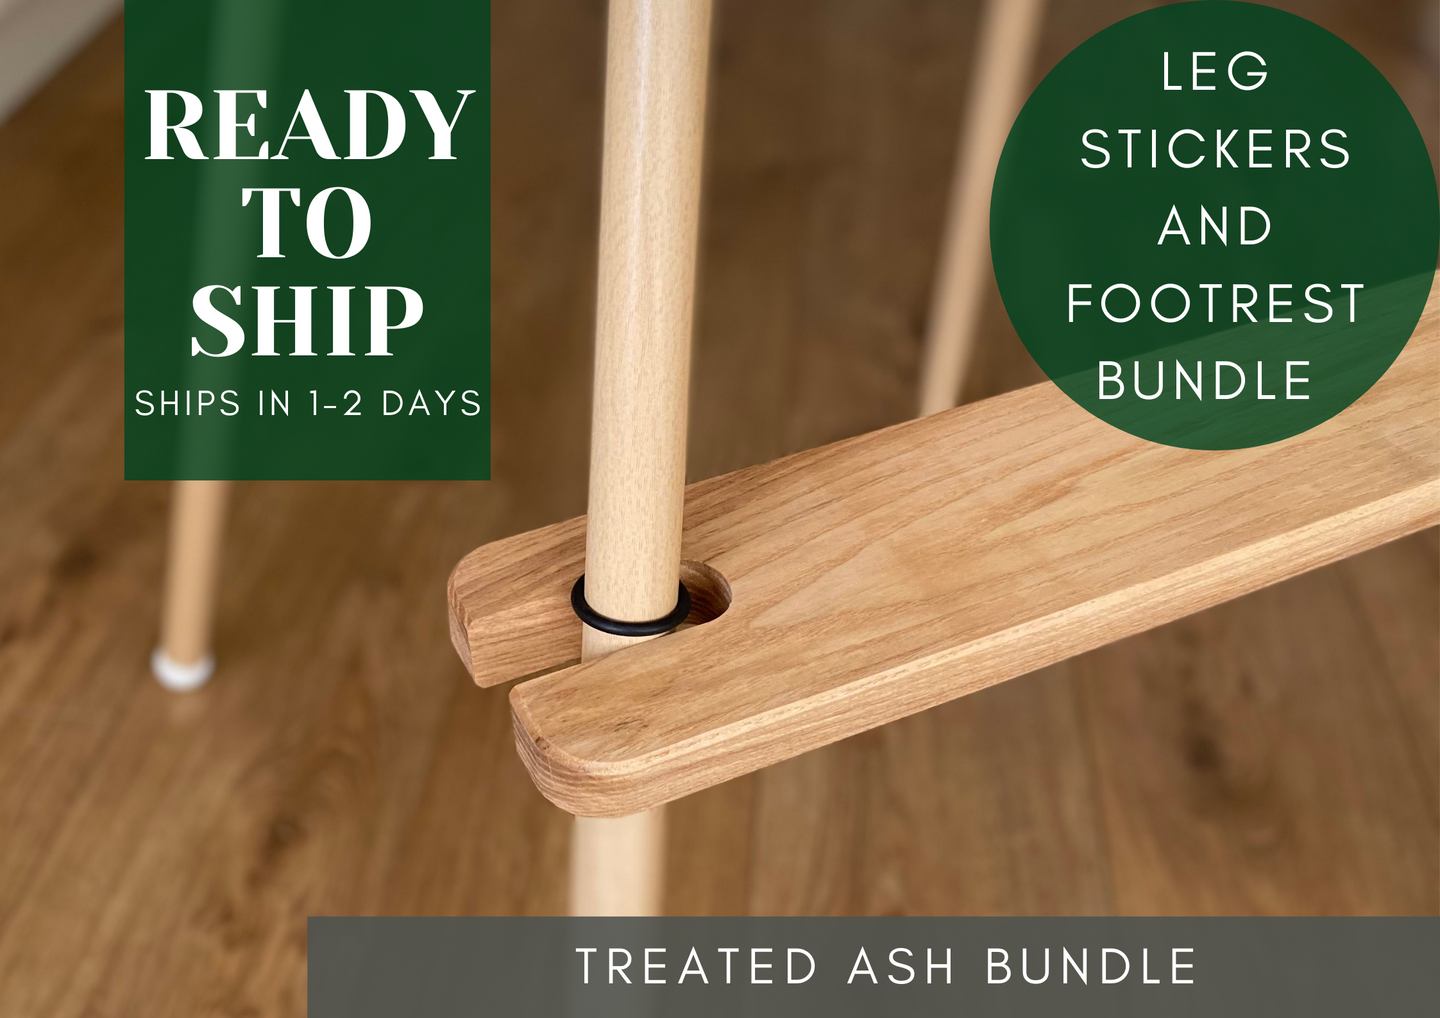 Treated Ash Footrest and Leg Stickers Bundle